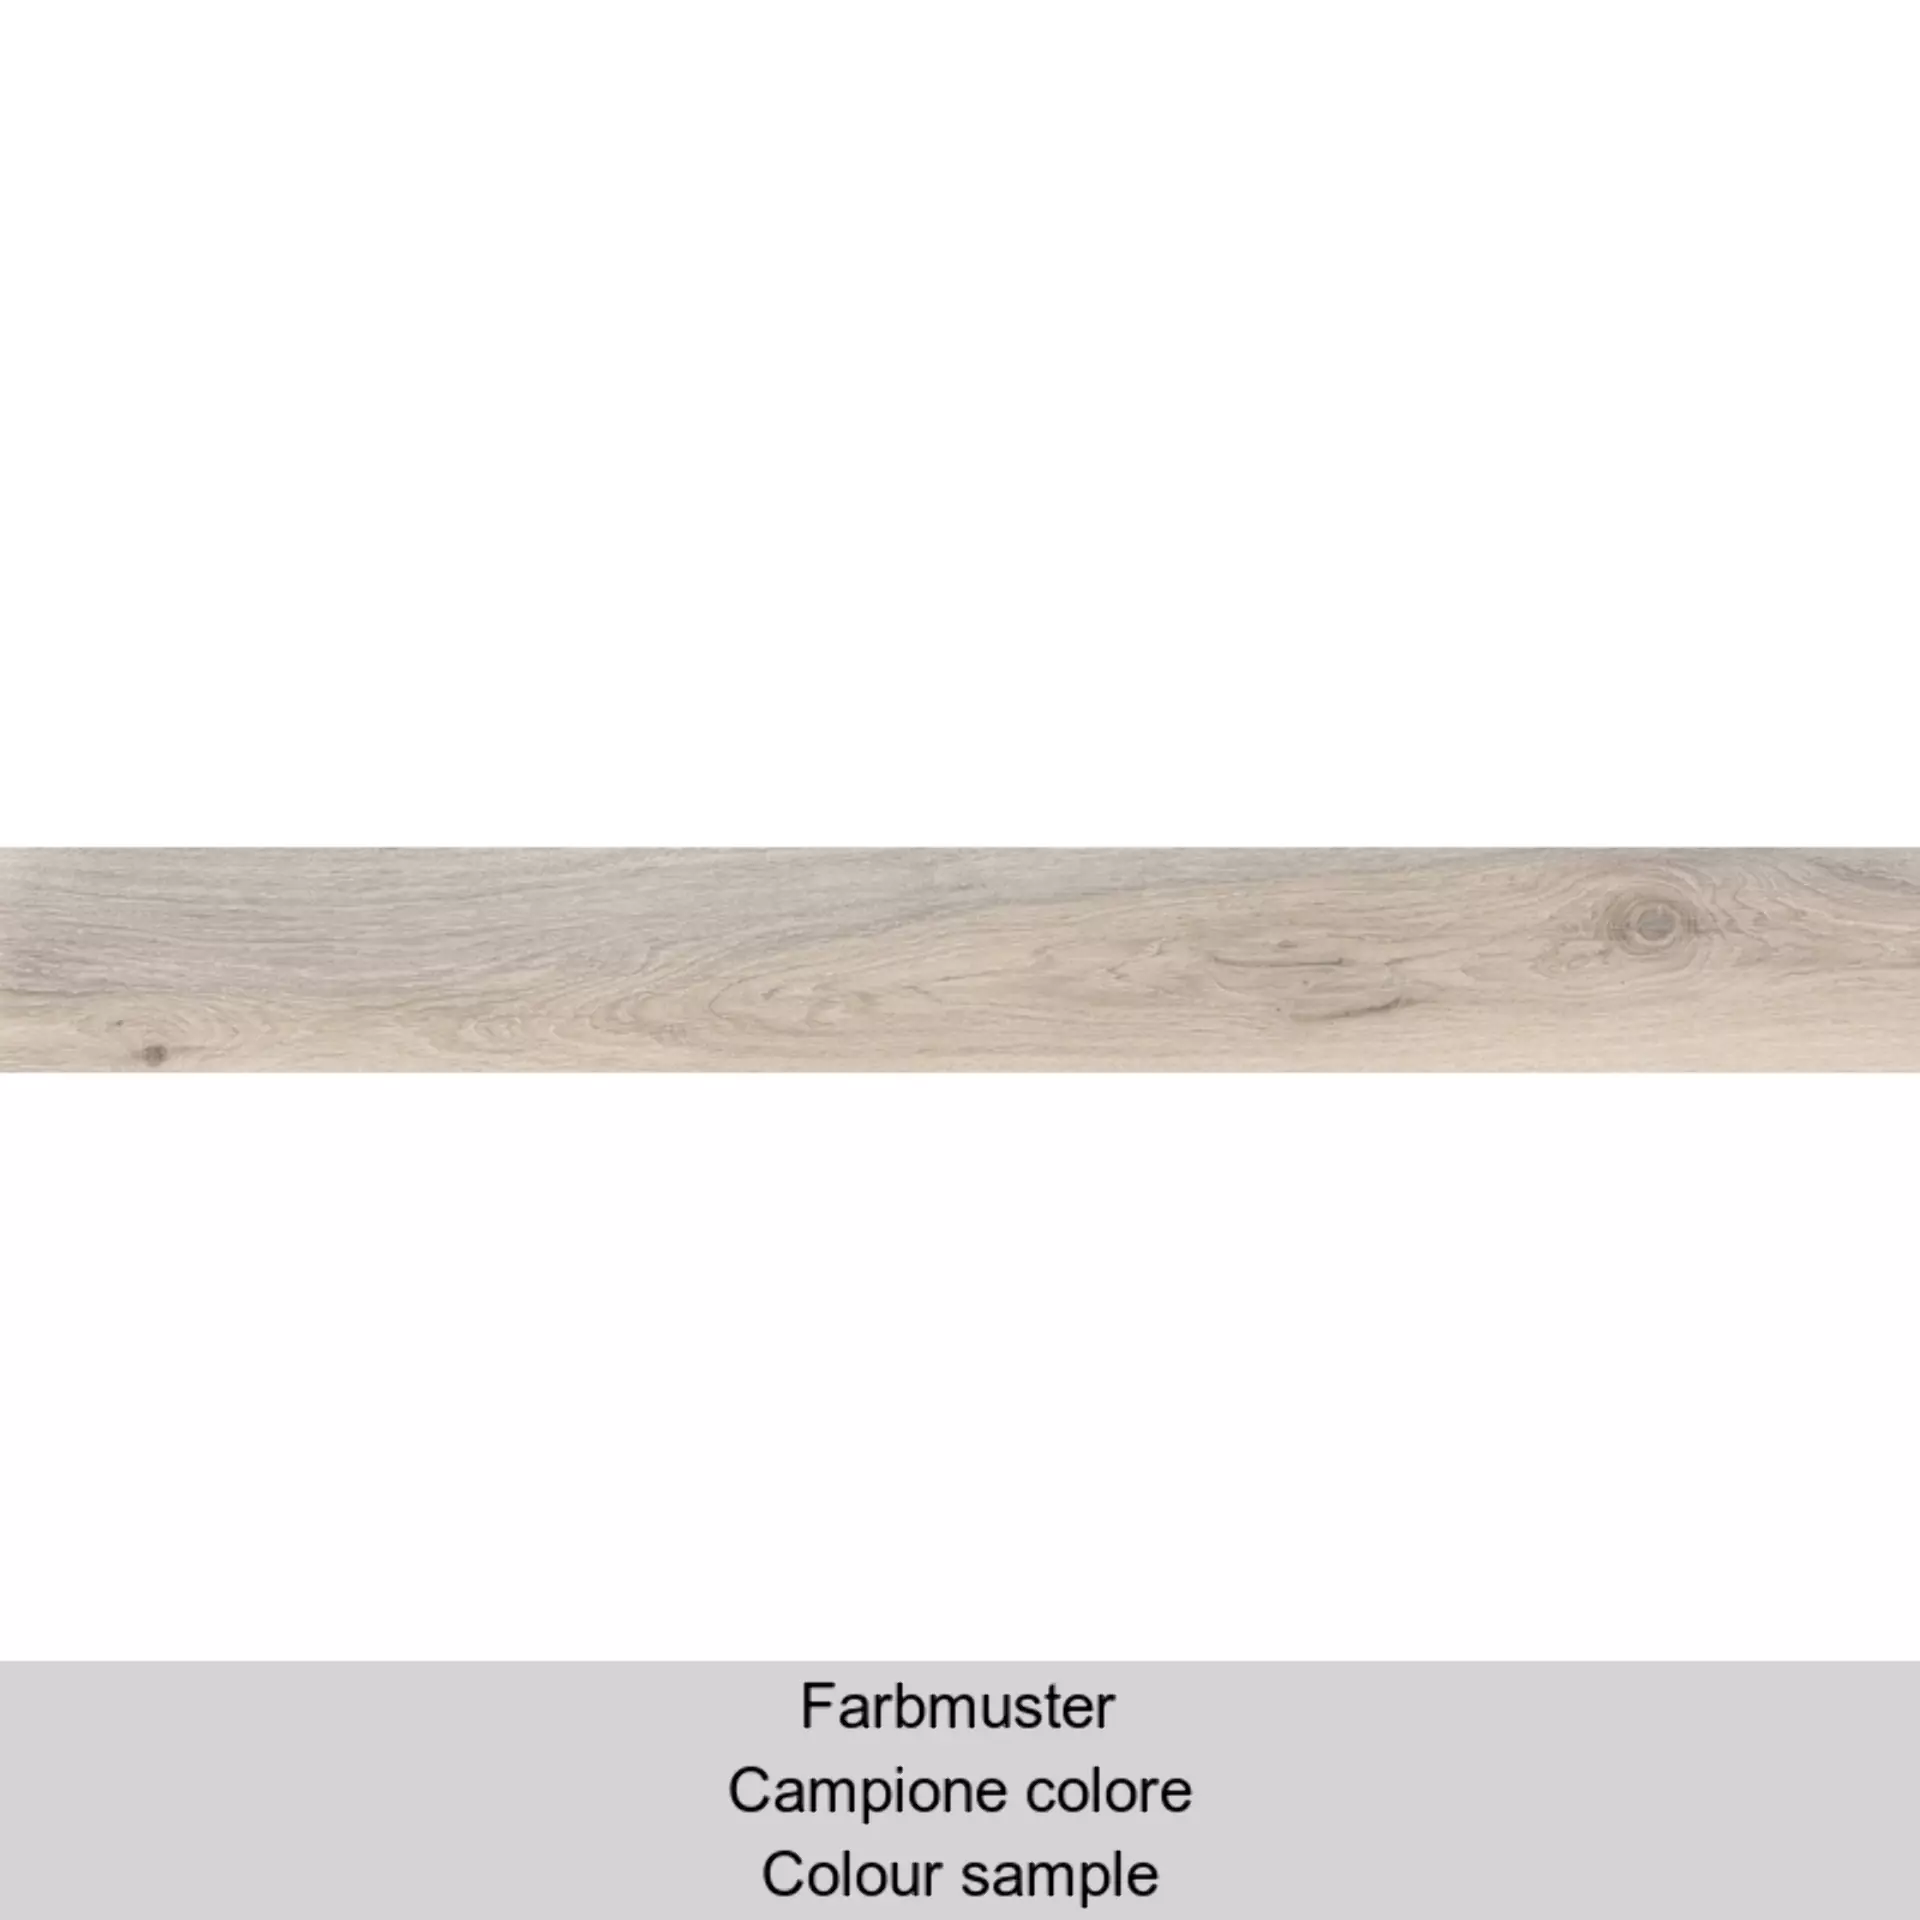 ABK Eco-Chic Almond Naturale PF60006390 20x170cm rectified 8,5mm